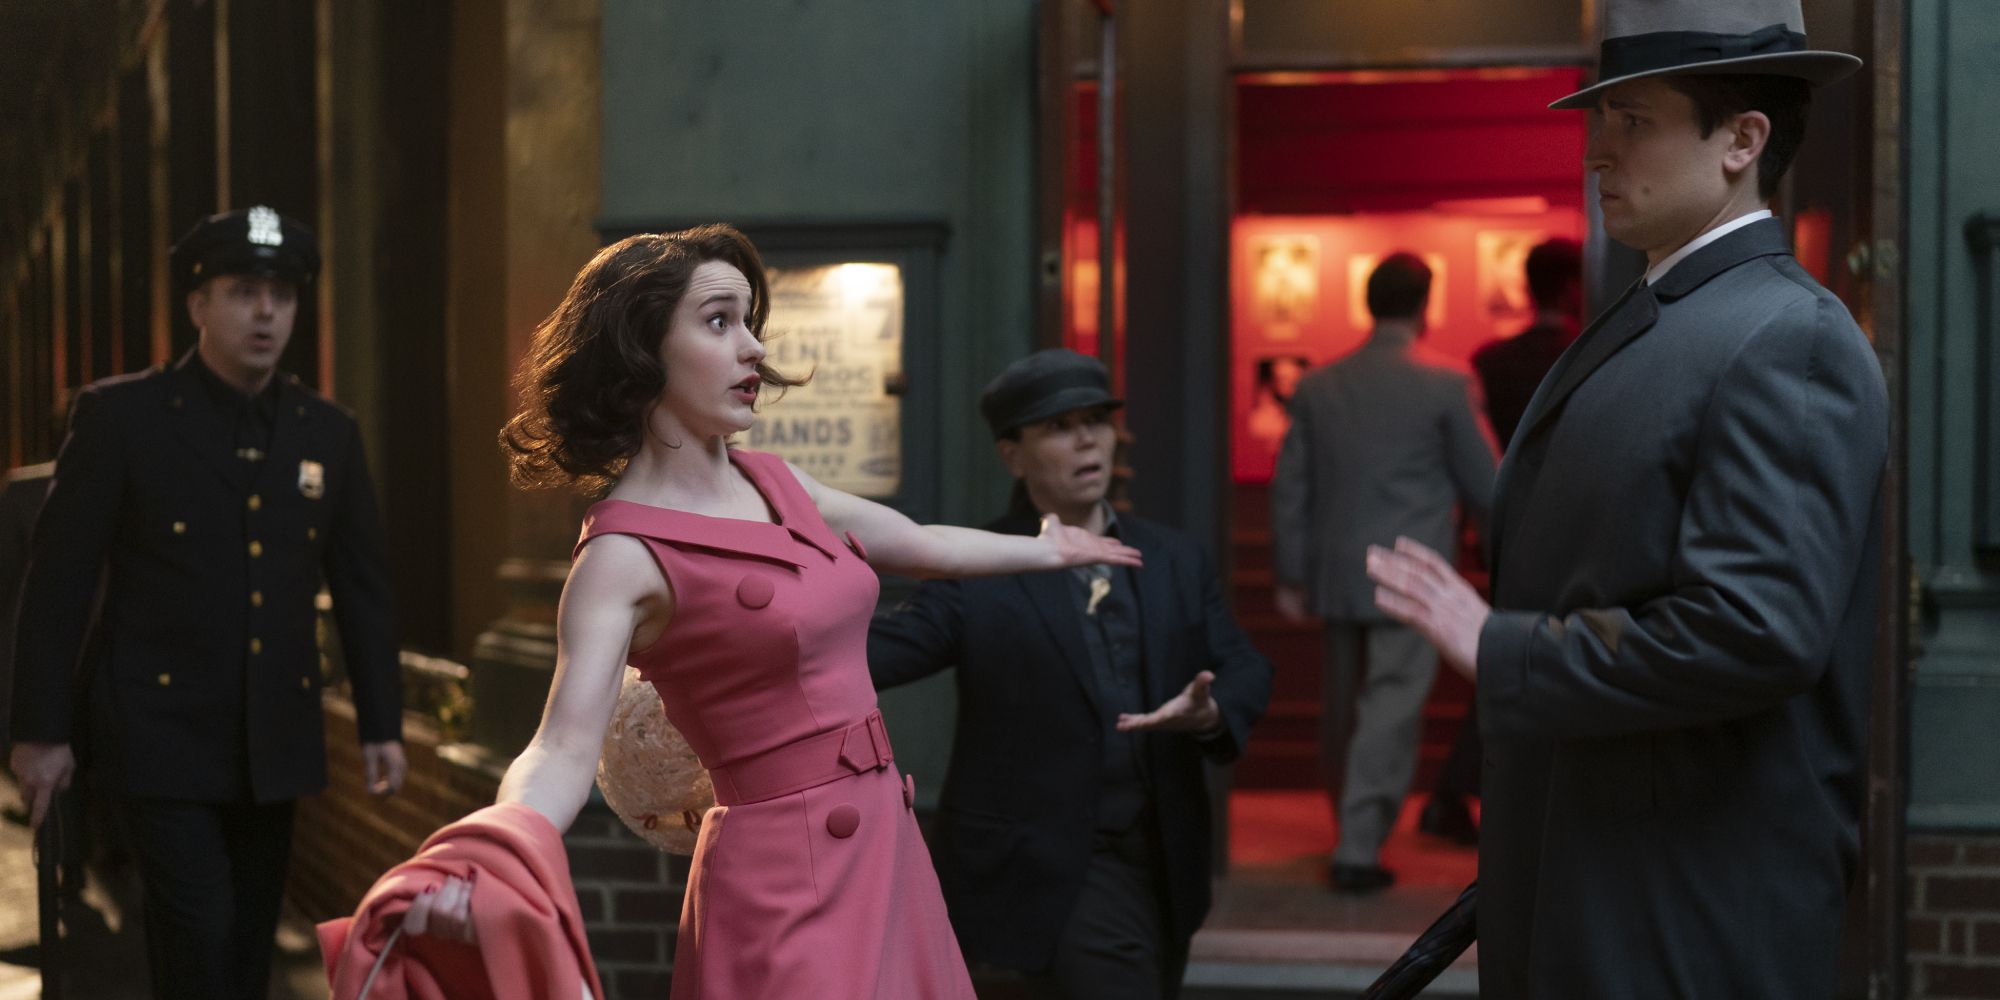 Midge Maisel from The Marvelous Mrs. Maisel, arms outstretched speaking to a man, Susie in the background.